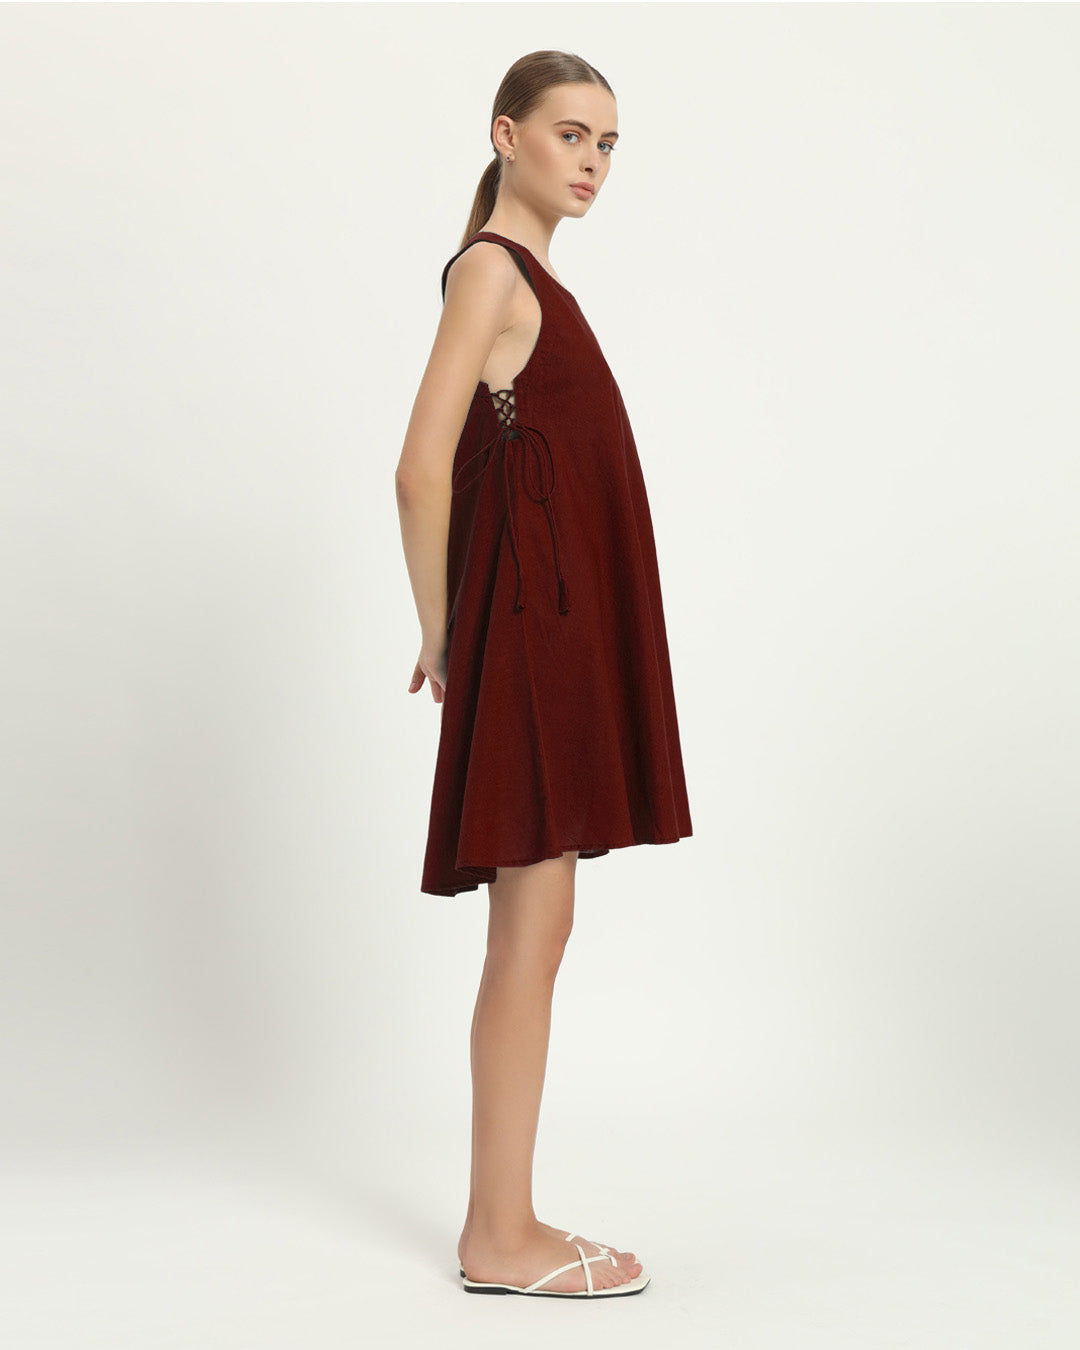 The Rhede Rouge Cotton Dress